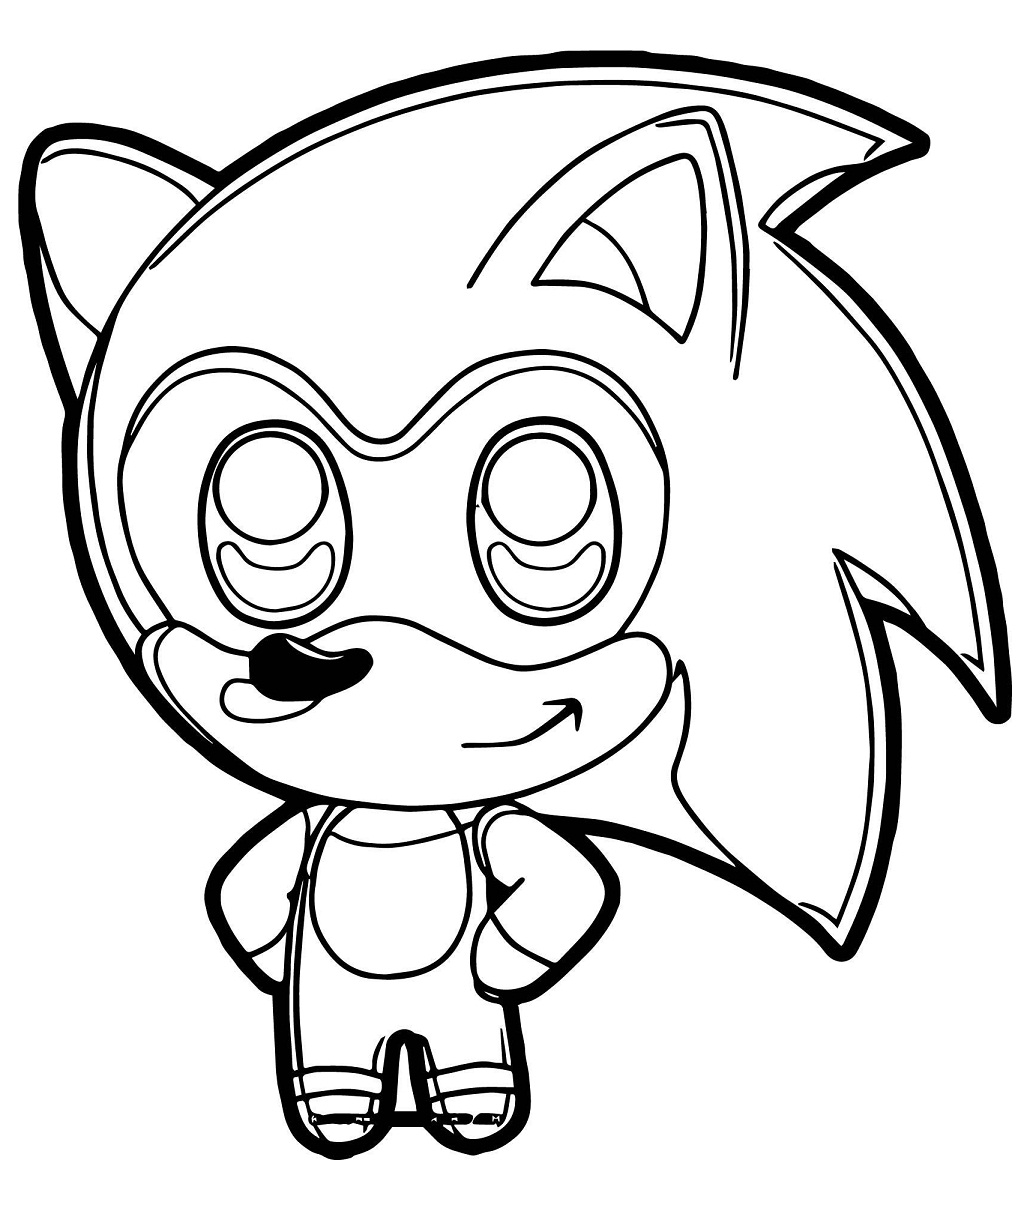 4400 Sonic Spiderman Coloring Pages  Best Free